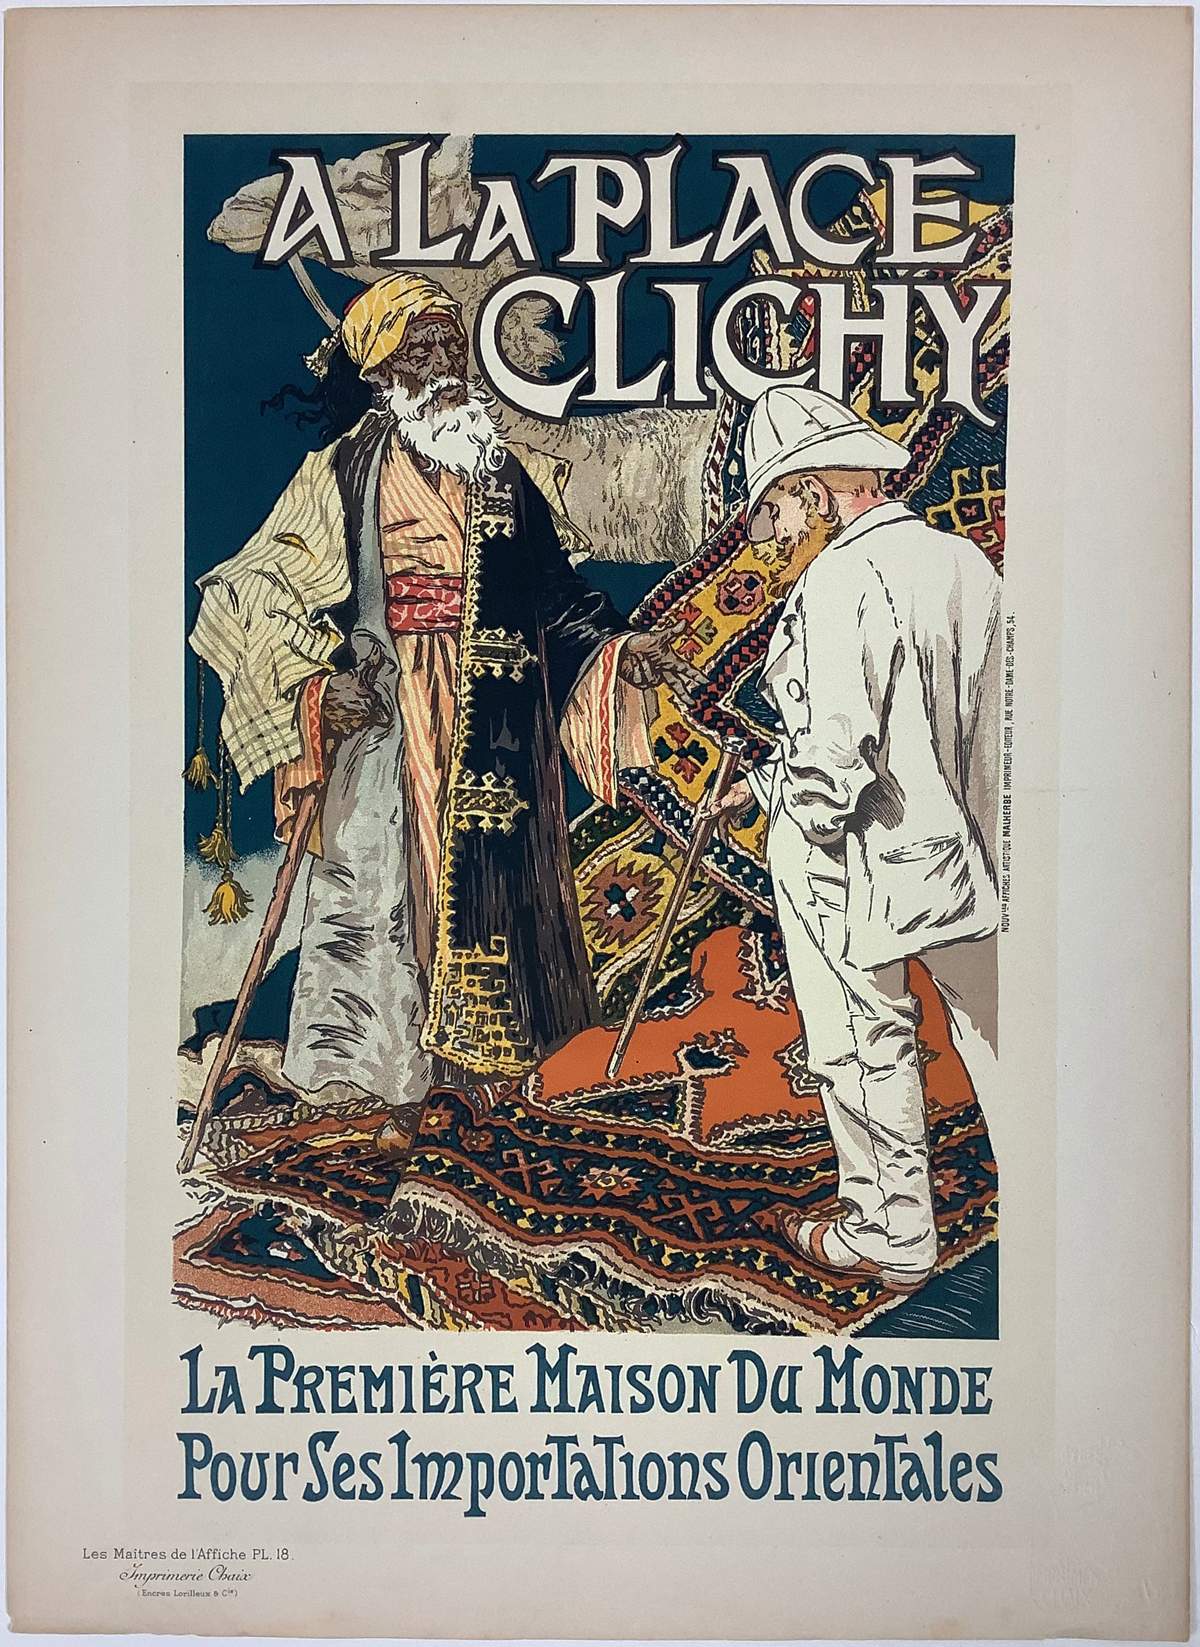 A La Place Clichy Original Les Maitres De L Affiche Plate 18 from 1896 by Eugene Grasset . This lithograph shows the world's finest establishment for Oriental imports. A man in robes and a turban is showing rugs to a man in a white suit. Original Antique Posters